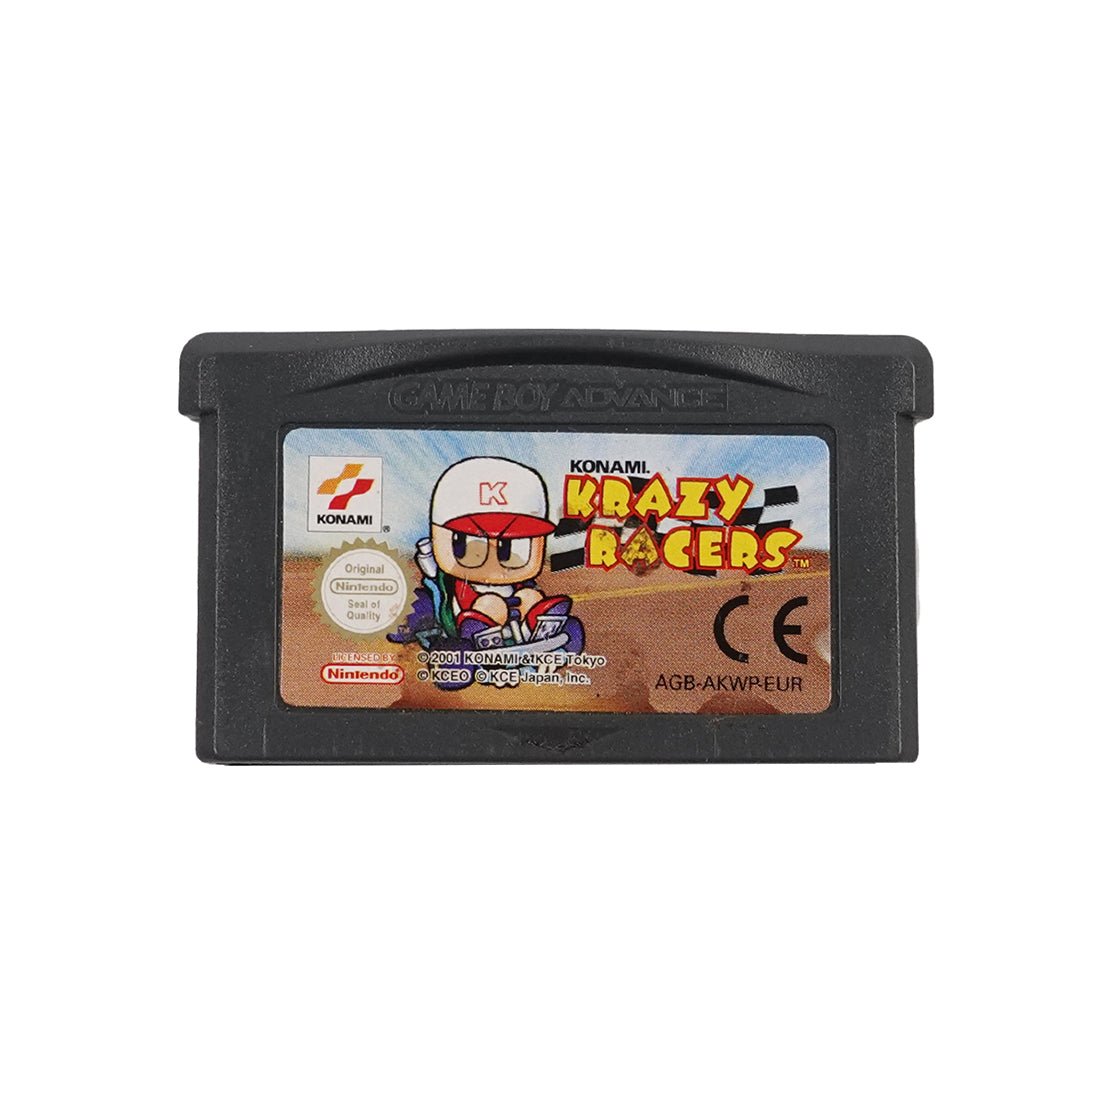 (Pre-Owned) Krazy Racers - Gameboy Advance - Store 974 | ستور ٩٧٤